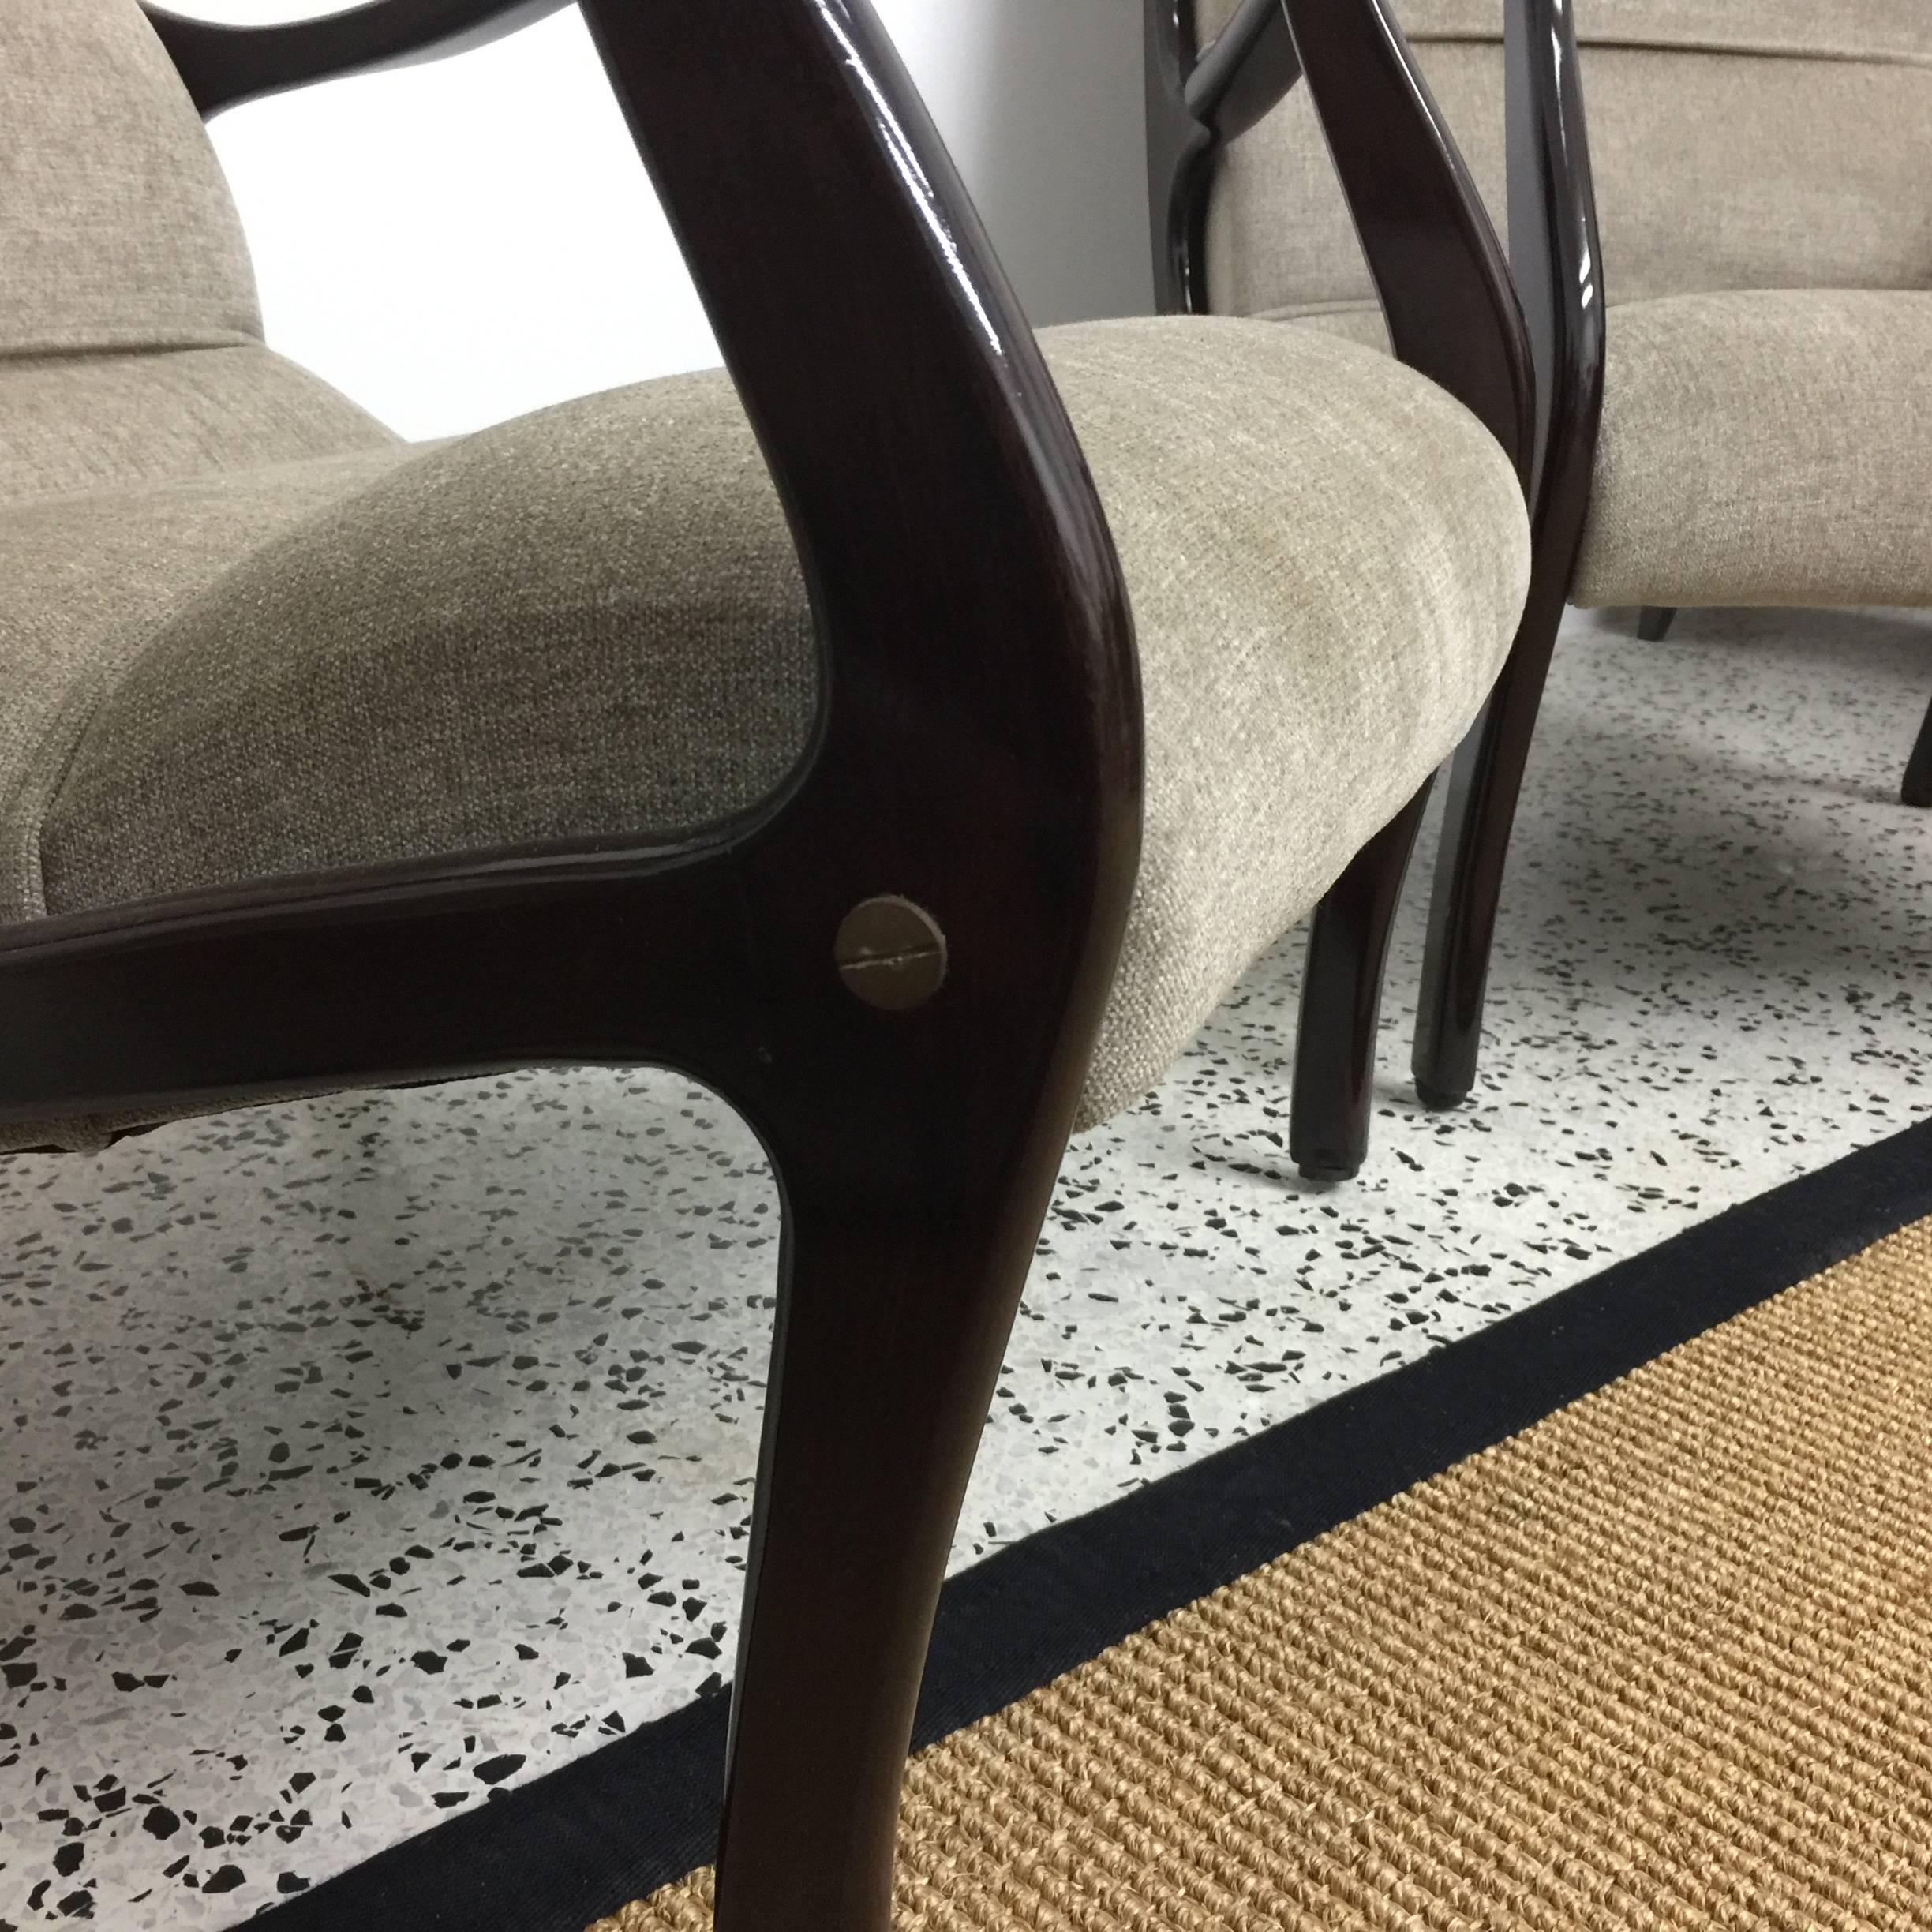 Bentwood armchairs with new upholstery, designed by Ezio Longhi for Elam, feature antiqued solid brass bolts and buttons to sides.